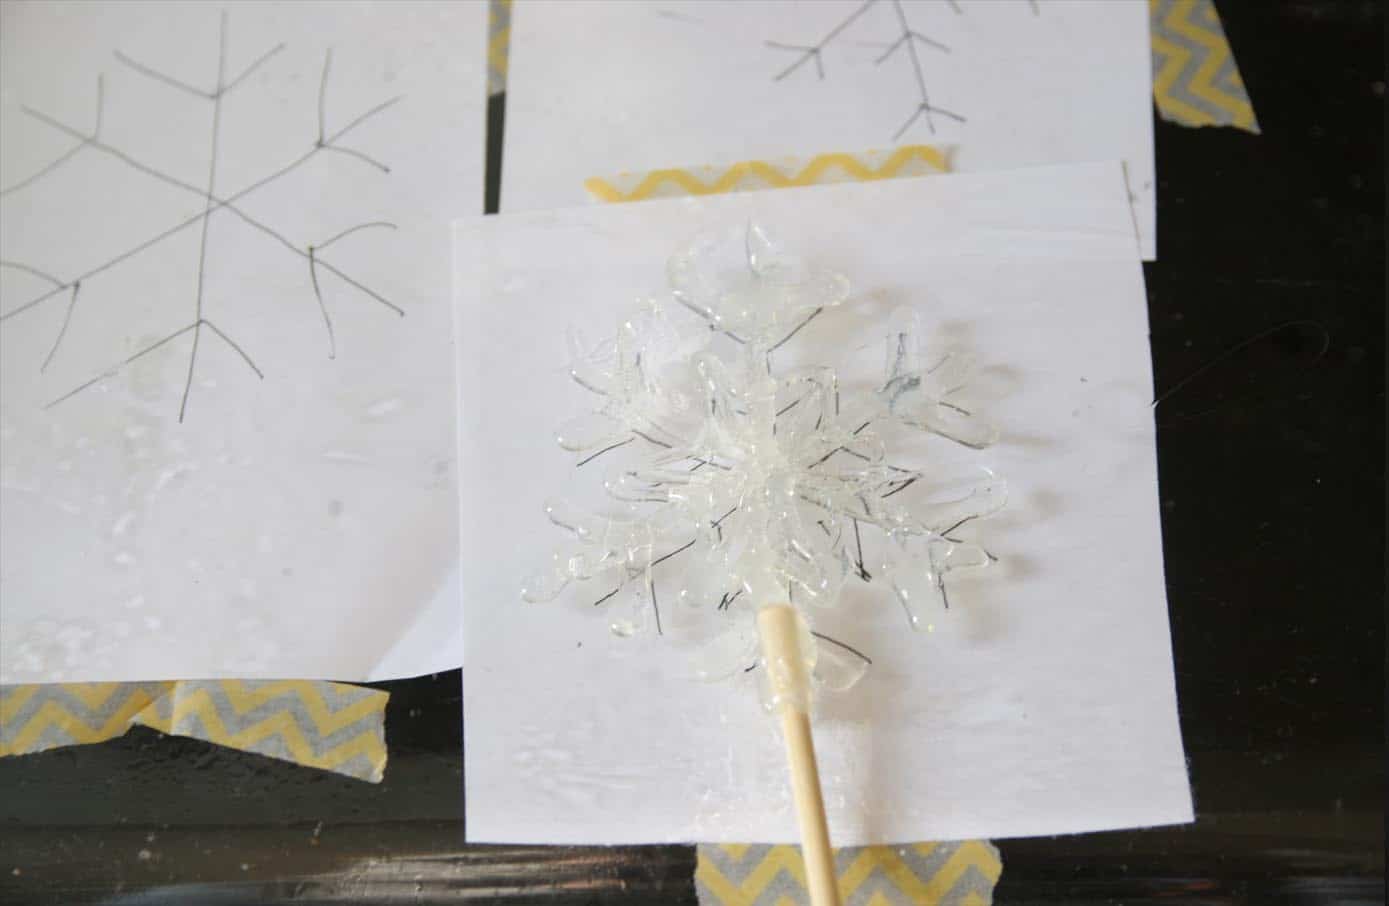 Hot glue painted in the shape of a snowflake using a template